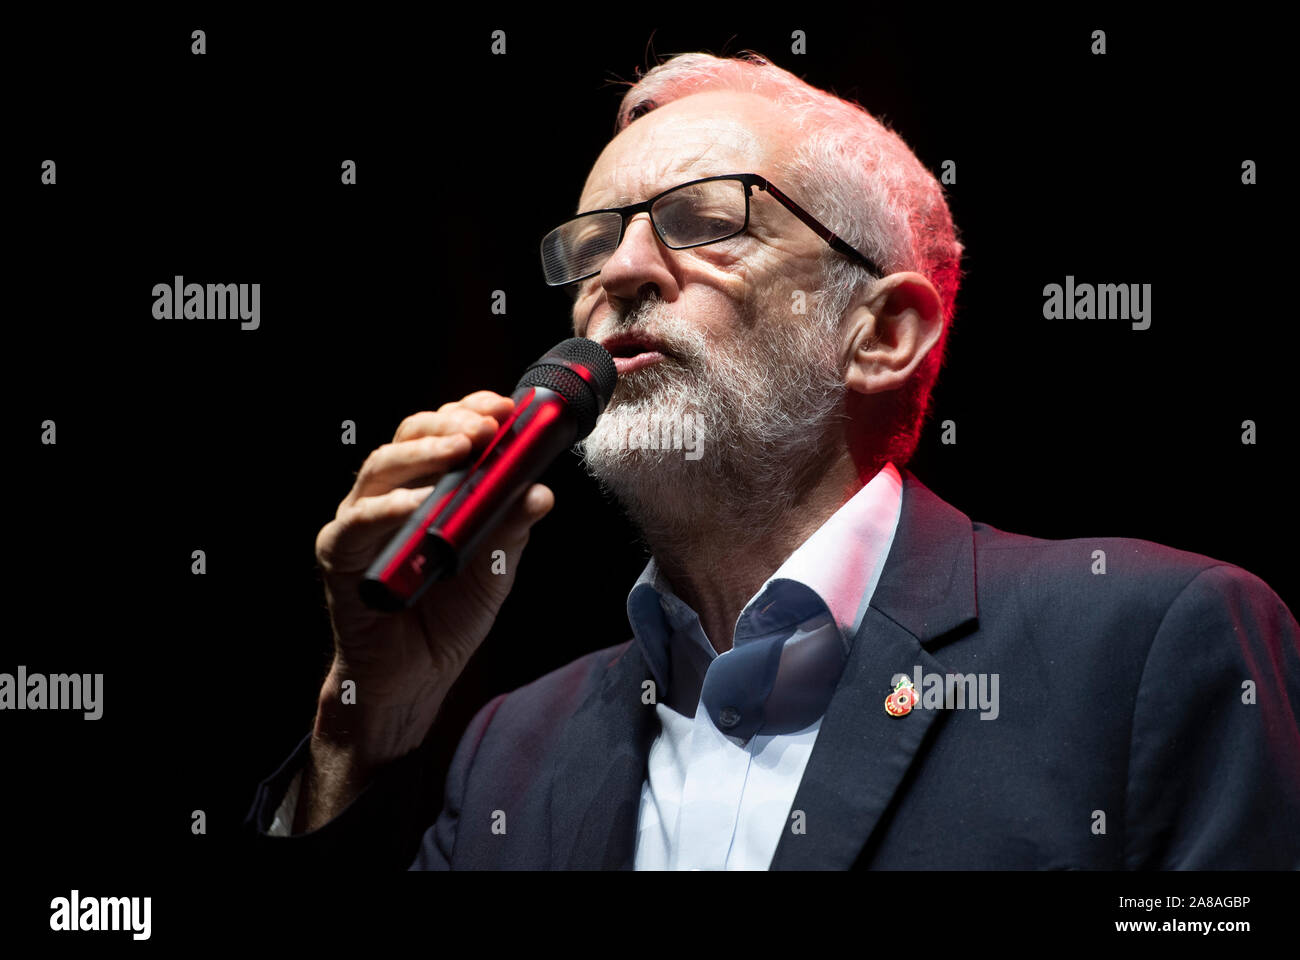 Manchester, UK. 7th November 2019. Jeremy Corbyn, Leader of the Labour Party and MP for Islington North, speaks at the Labour General Election Rally held at the O2 Apollo in Ardwick, Manchester. © Russell Hart/Alamy Live News. Stock Photo